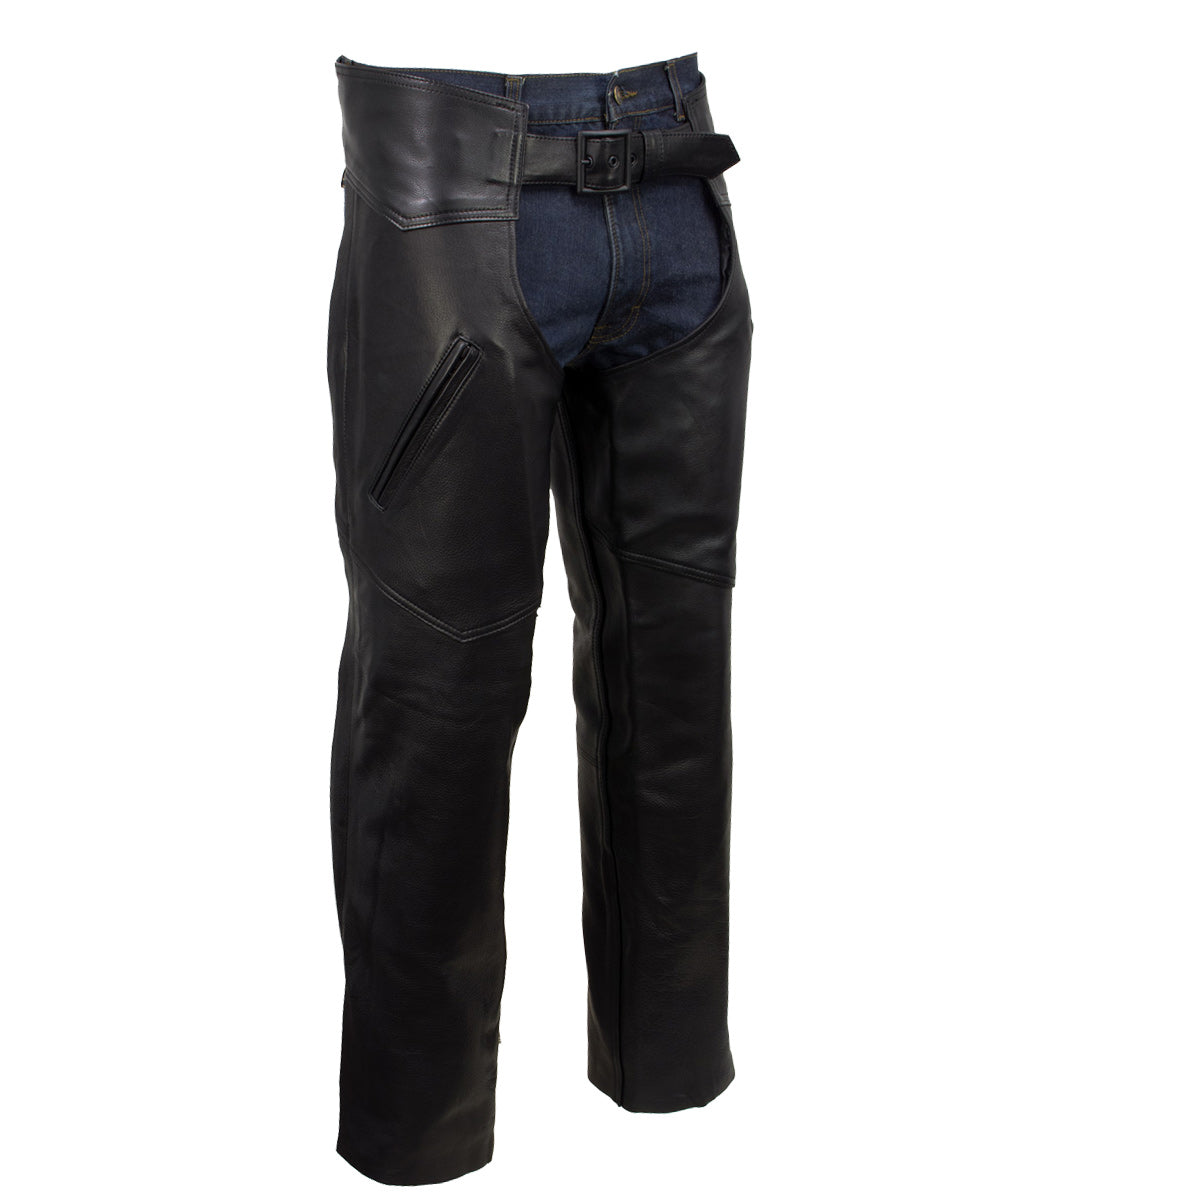 Milwaukee Leather USA MADE MLCHM5001 Men's Black 'Cloak' Classic Premium Leather Motorcycle Chaps